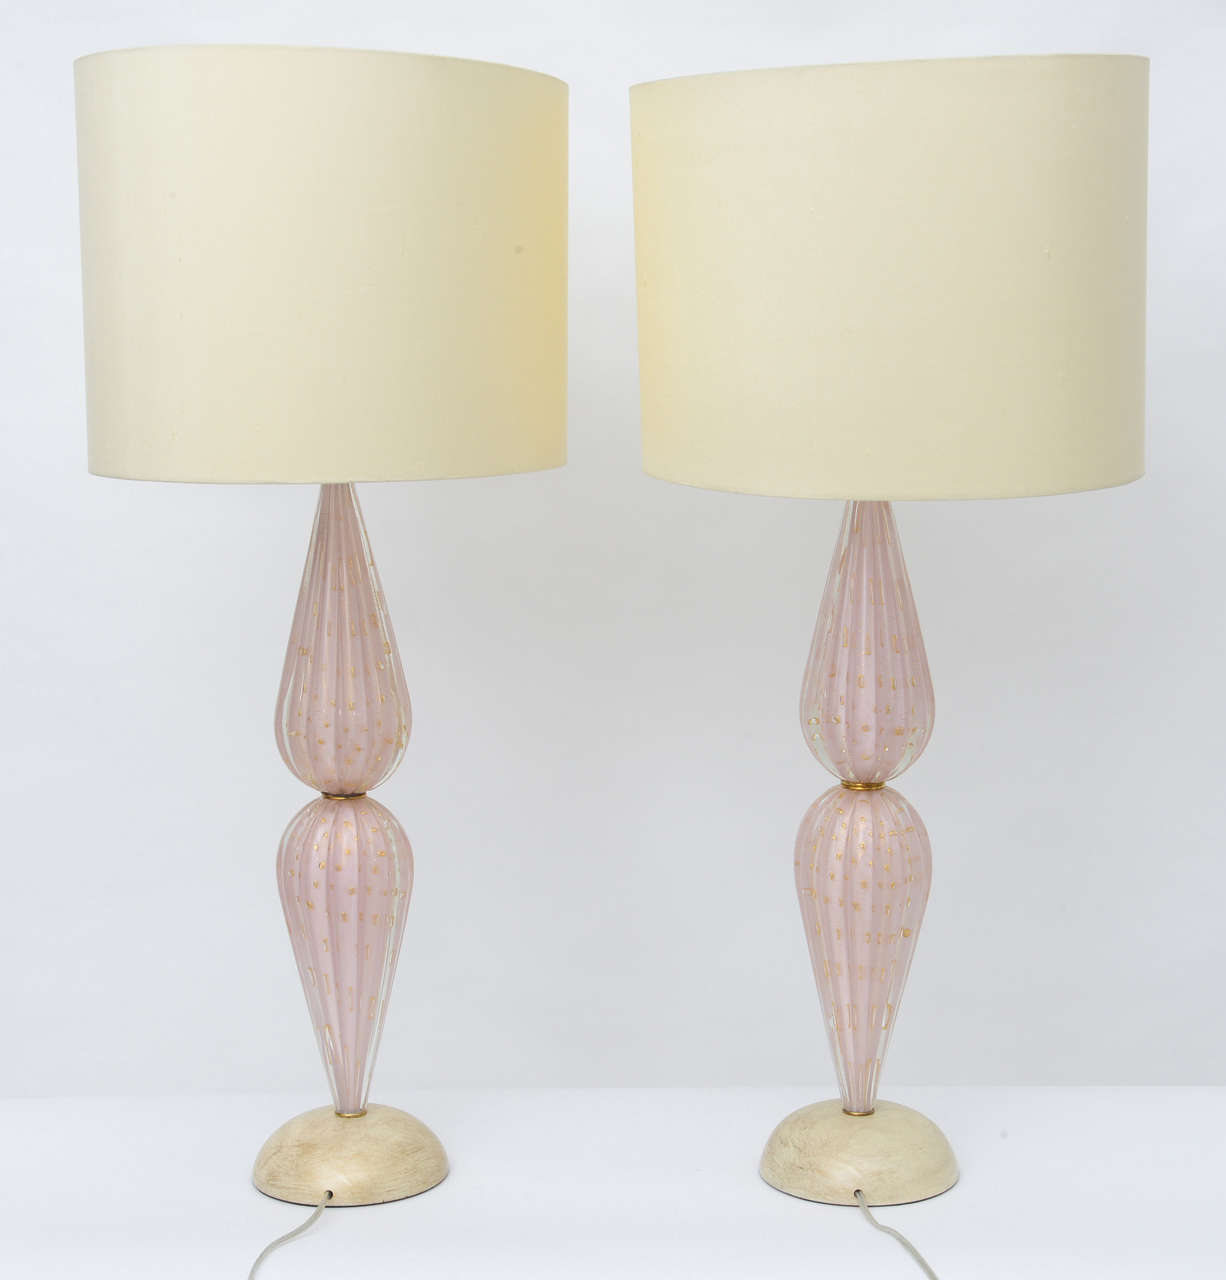 Stunning pair of handblown ribbed Murano glass lamps in a rarely found beautiful shade of Venetian pink with gold bubble inclusions and a lot of gold flecking designed by Alfredo Barbini. The lamps are designed using two opposing handblown teardrop